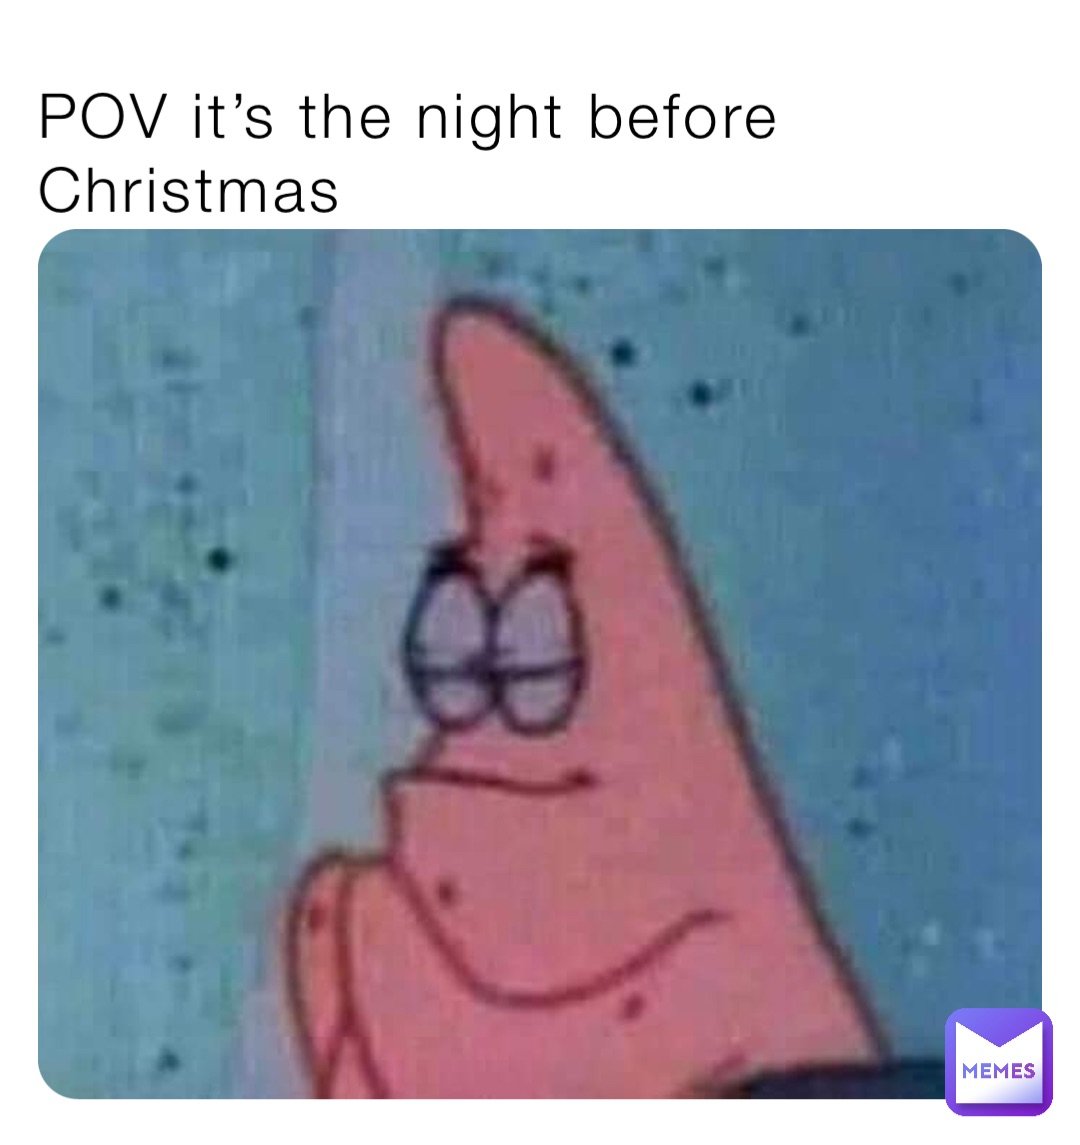 POV it’s the night before Christmas